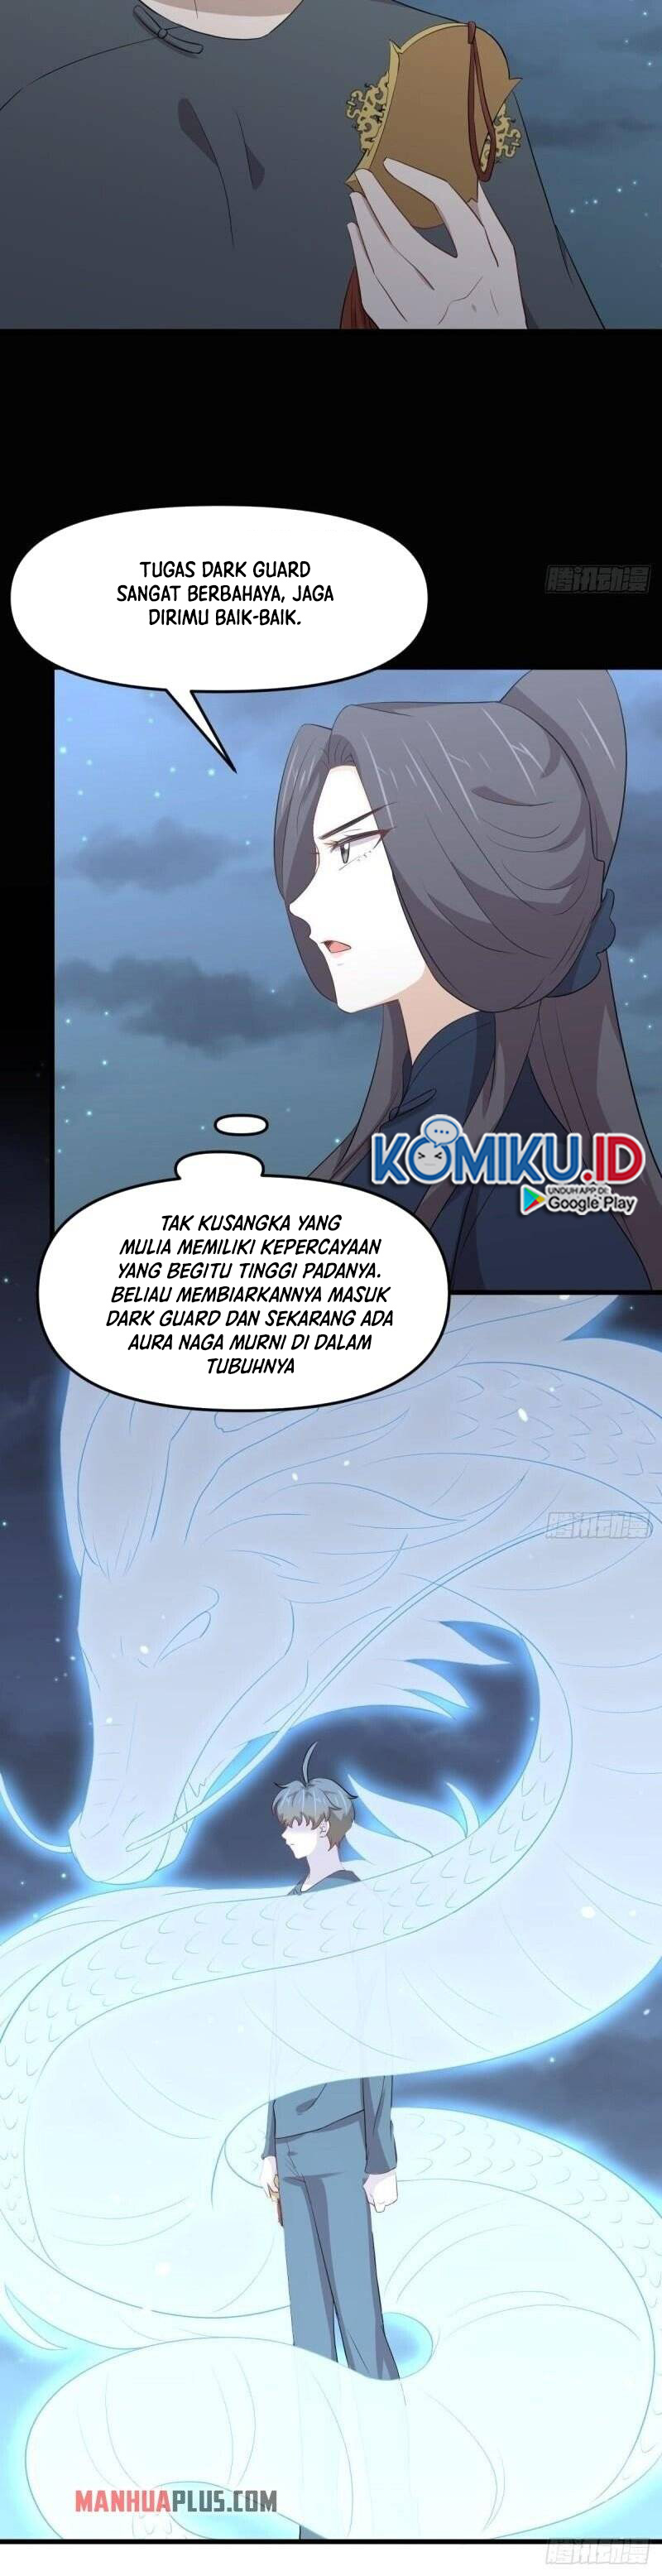 Immortal Swordsman in The Reverse World Chapter 303